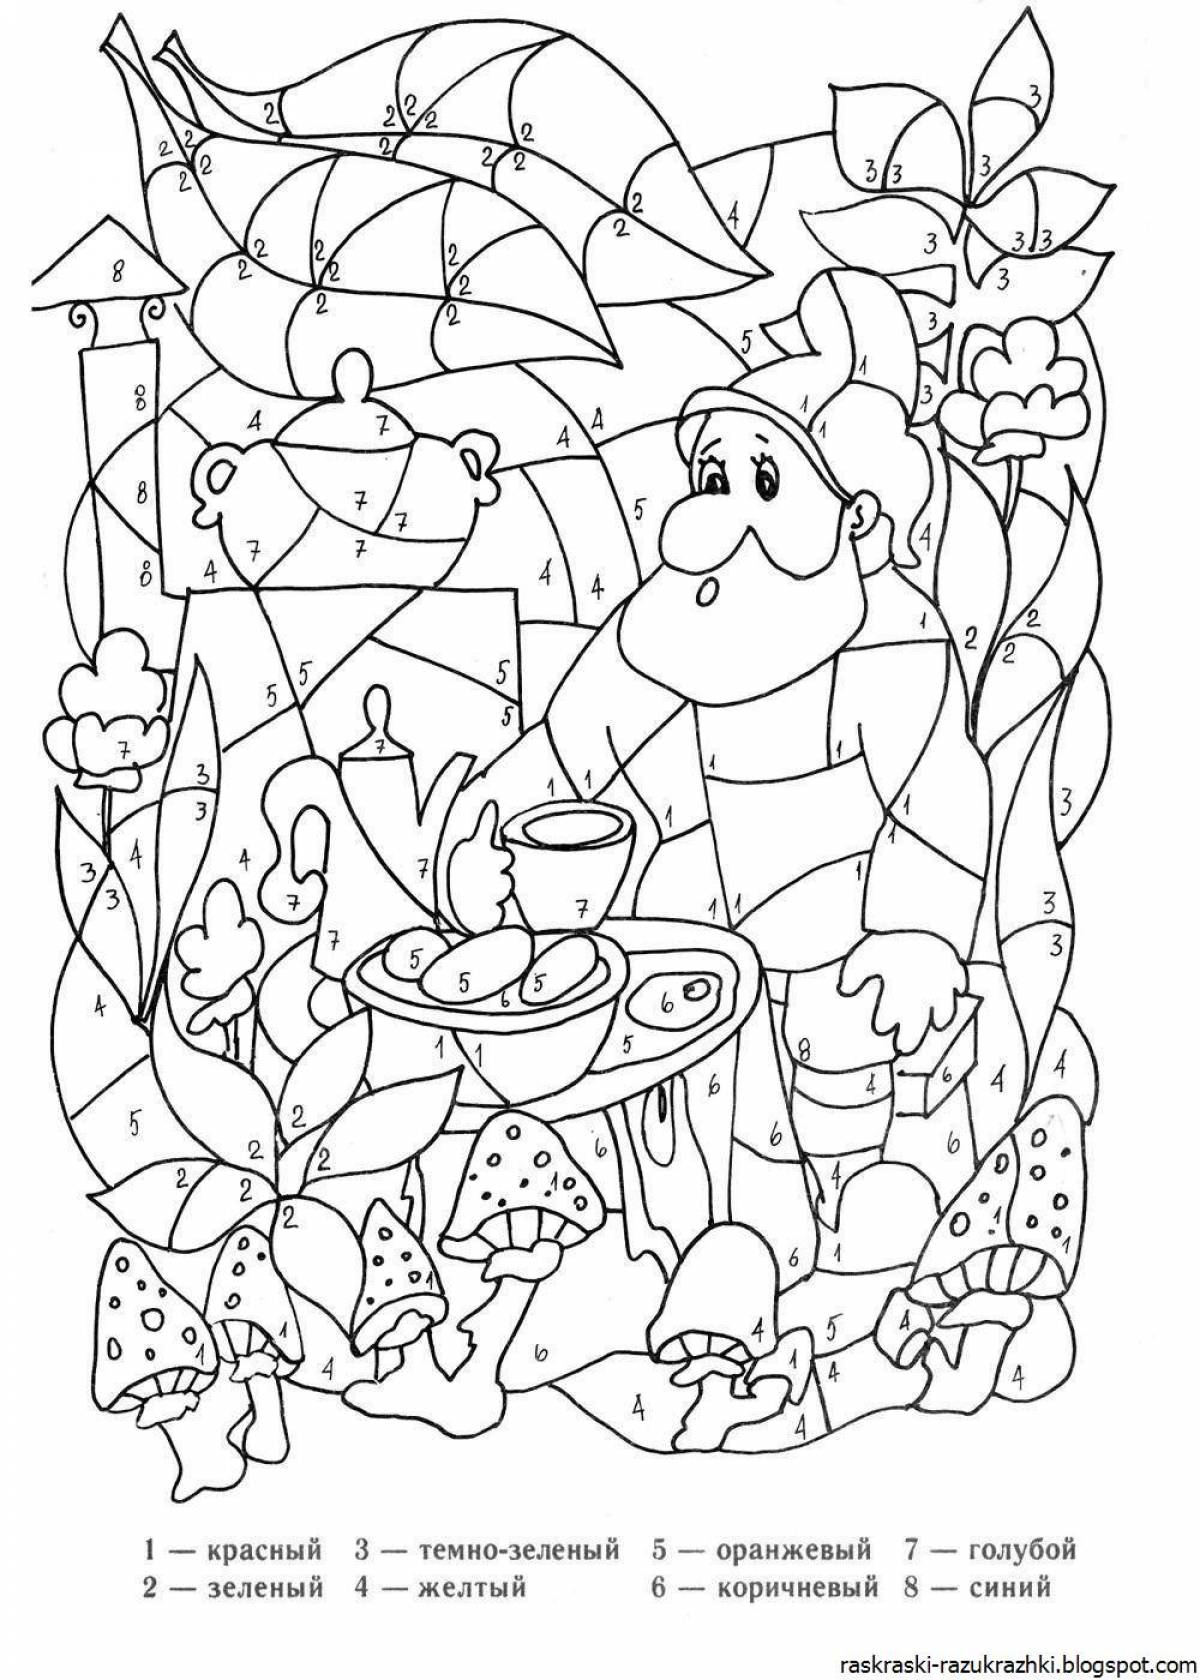 Coloring-journey coloring page 6 years